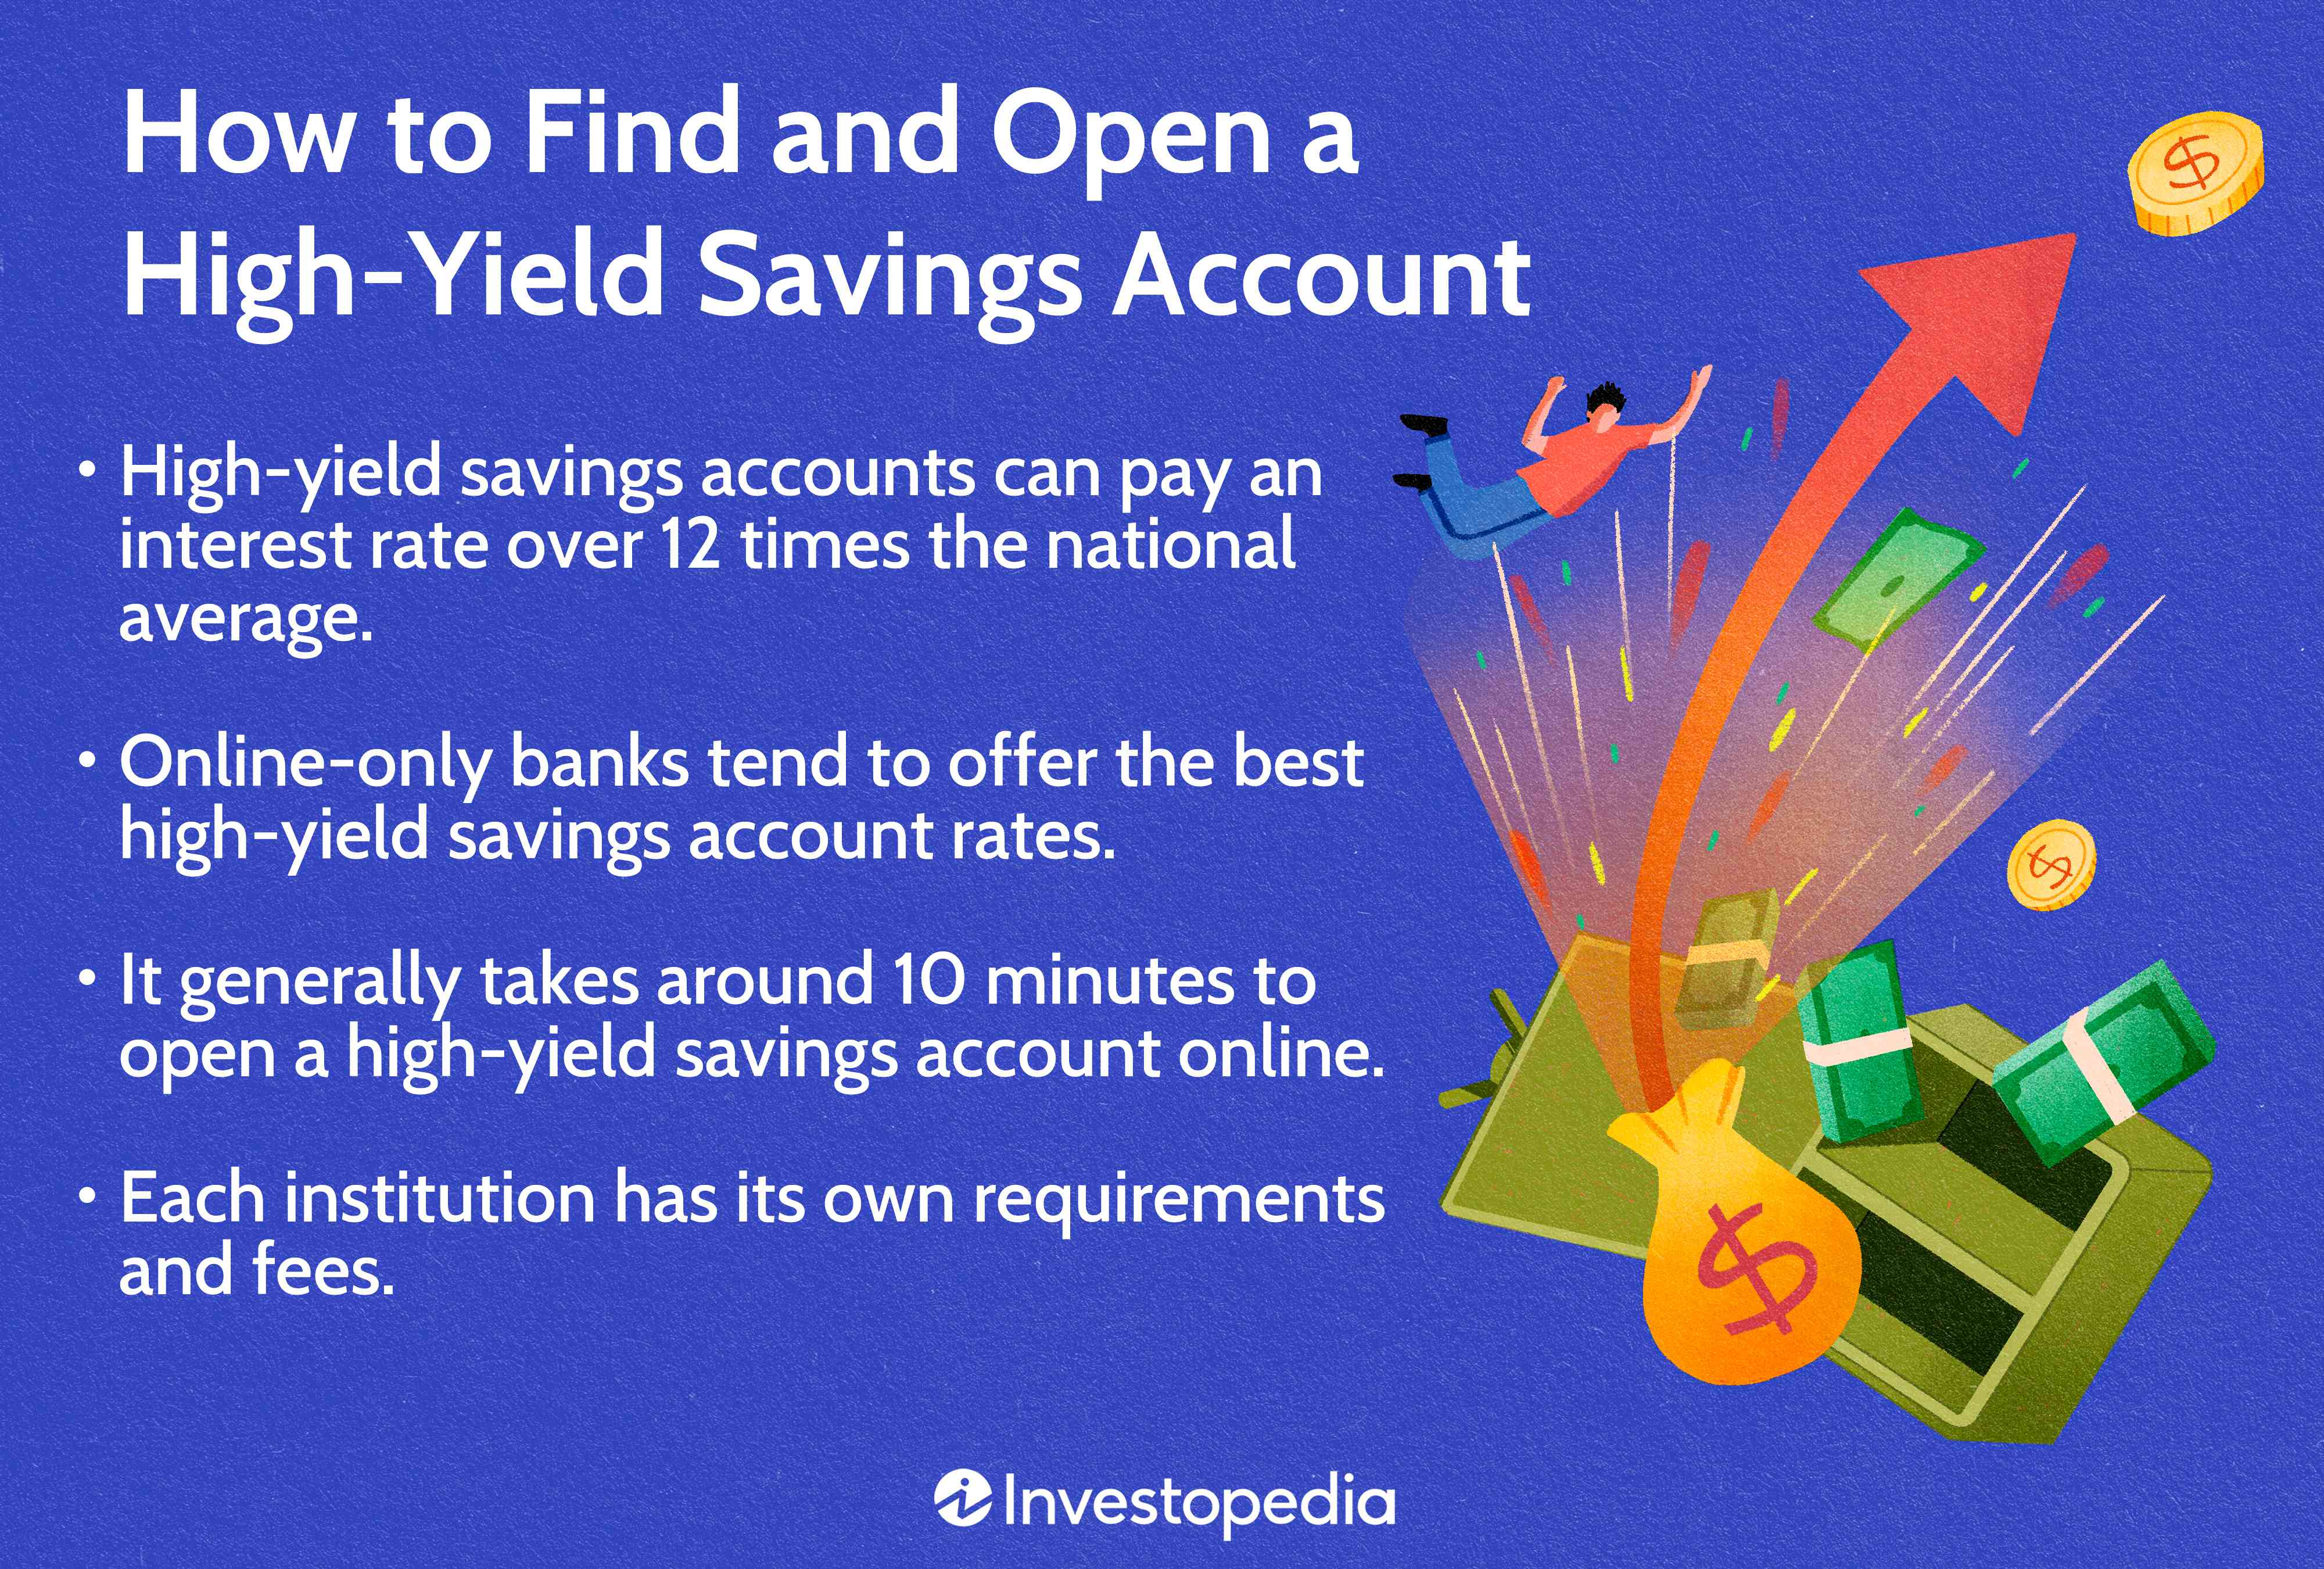 How to Find and Open a High-Yield Savings Account